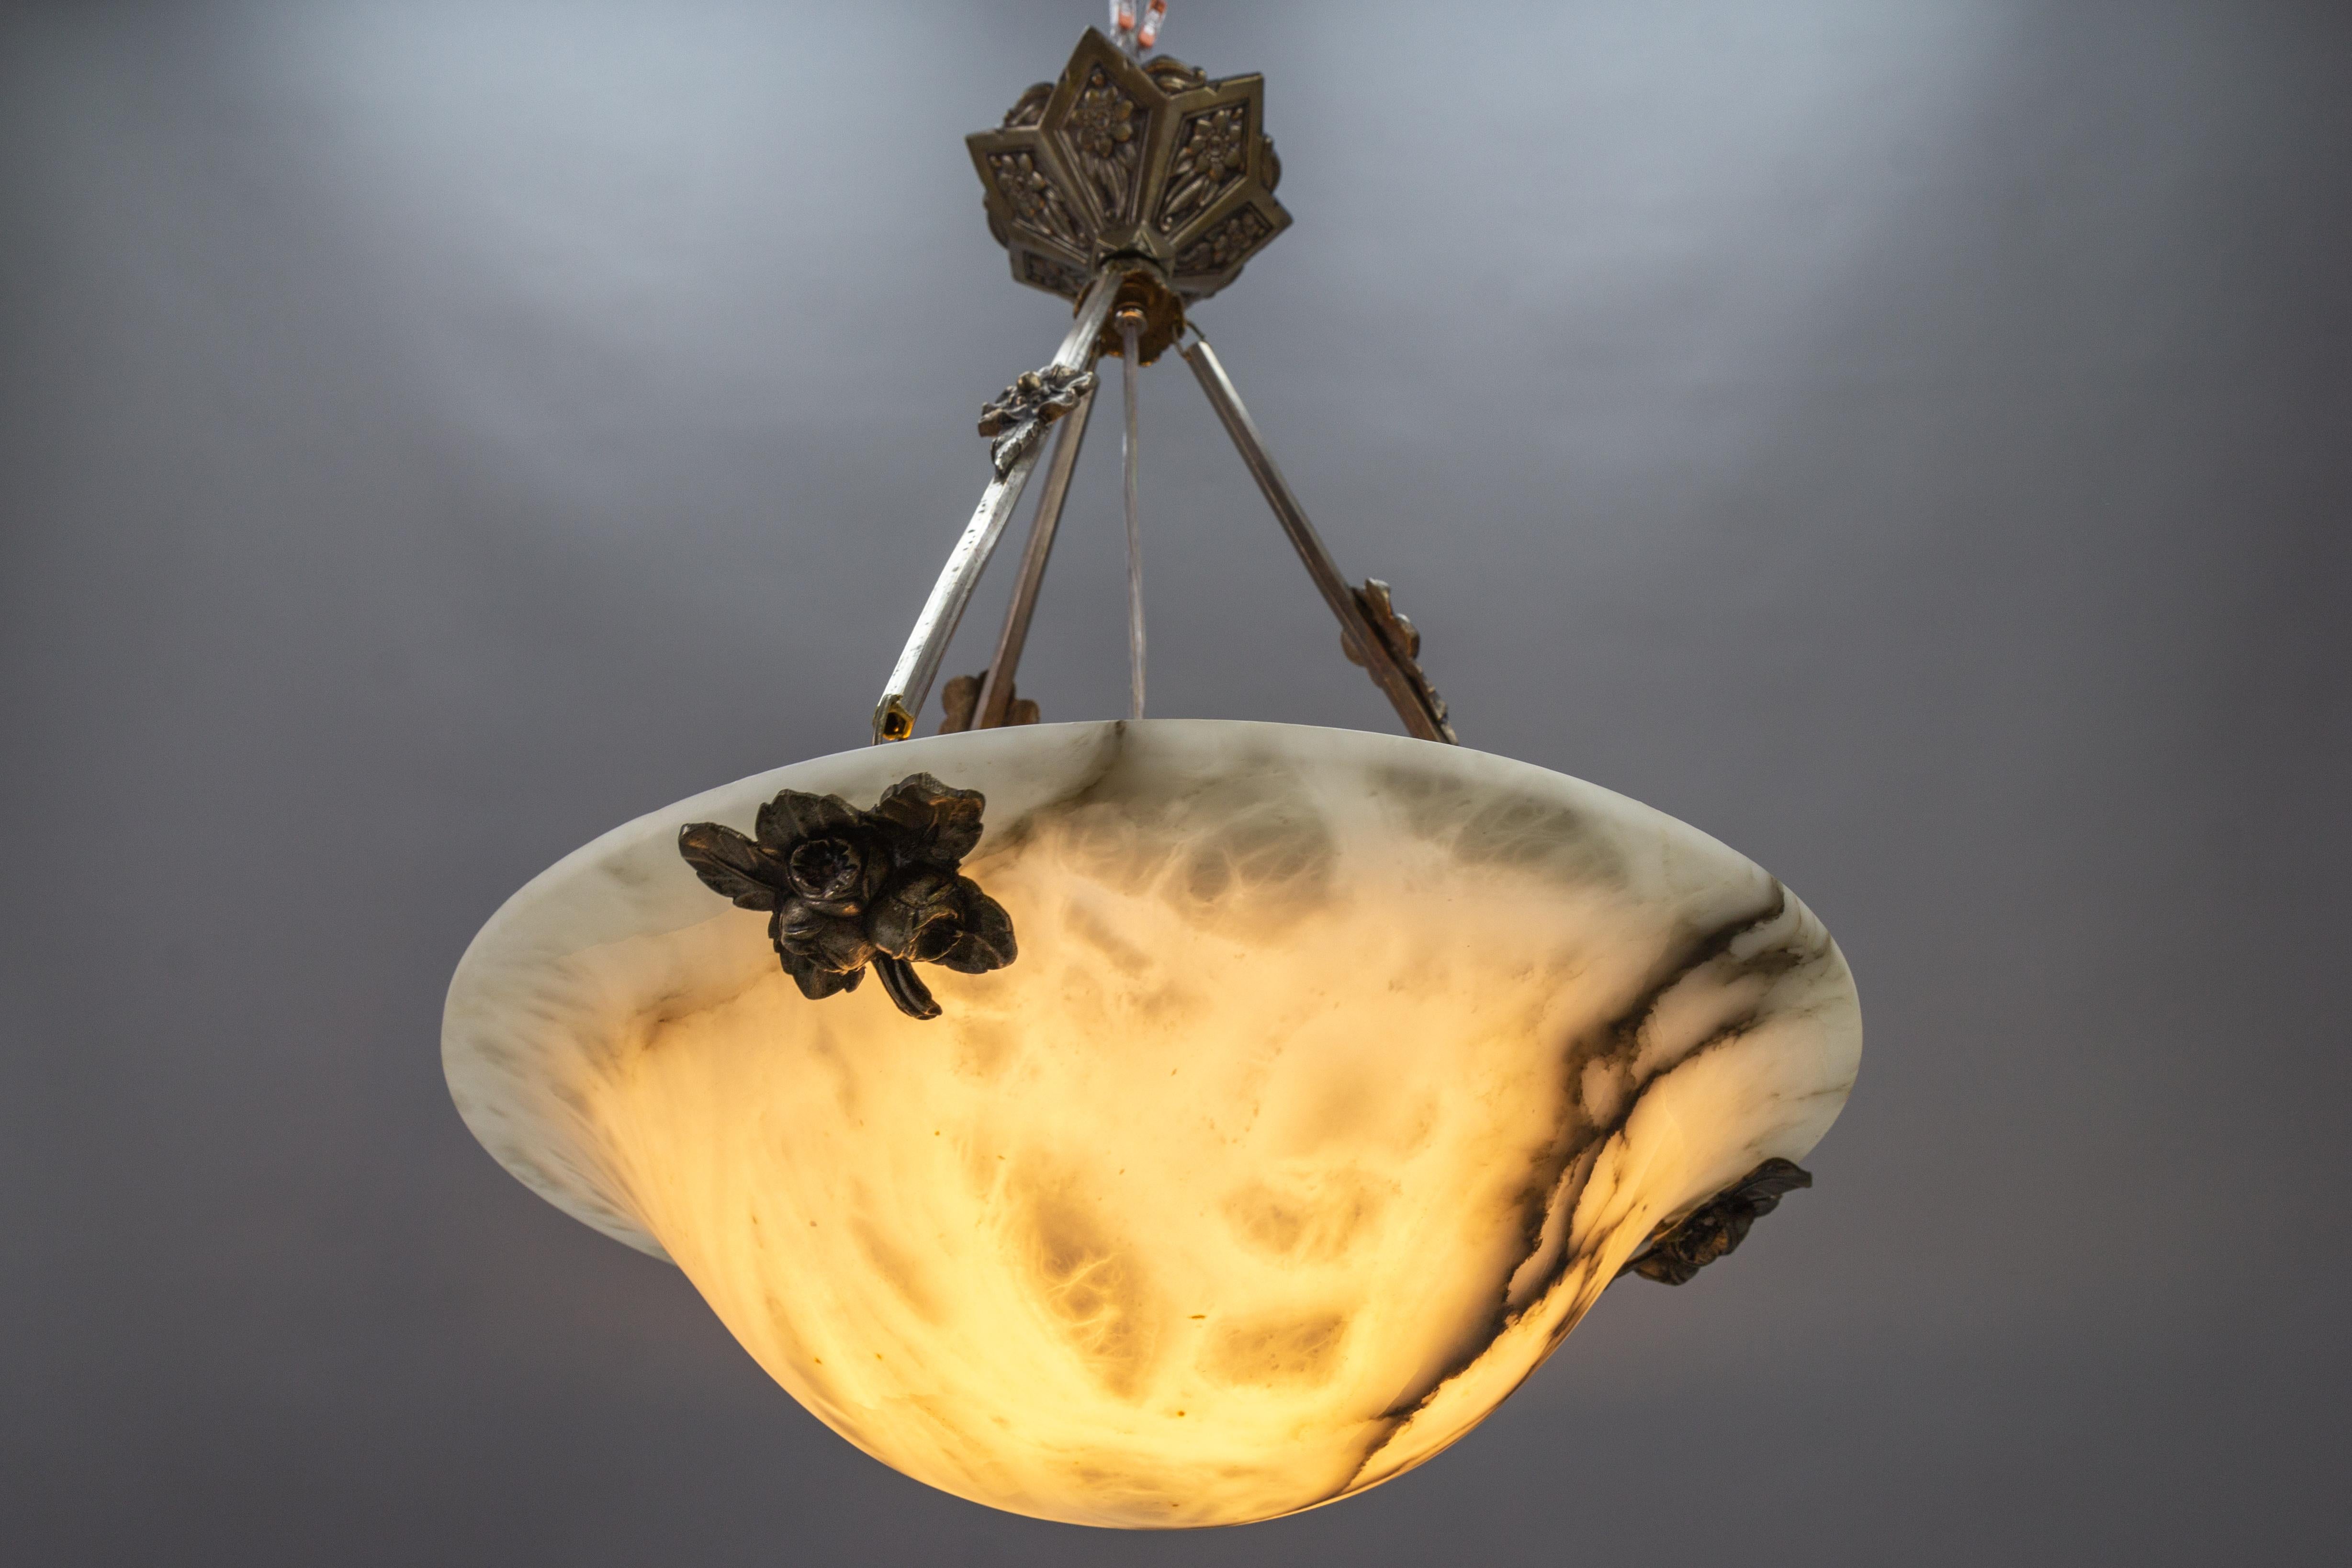 French Art Deco White and Black Veined Alabaster Pendant Light Fixture, ca. 1920 For Sale 1